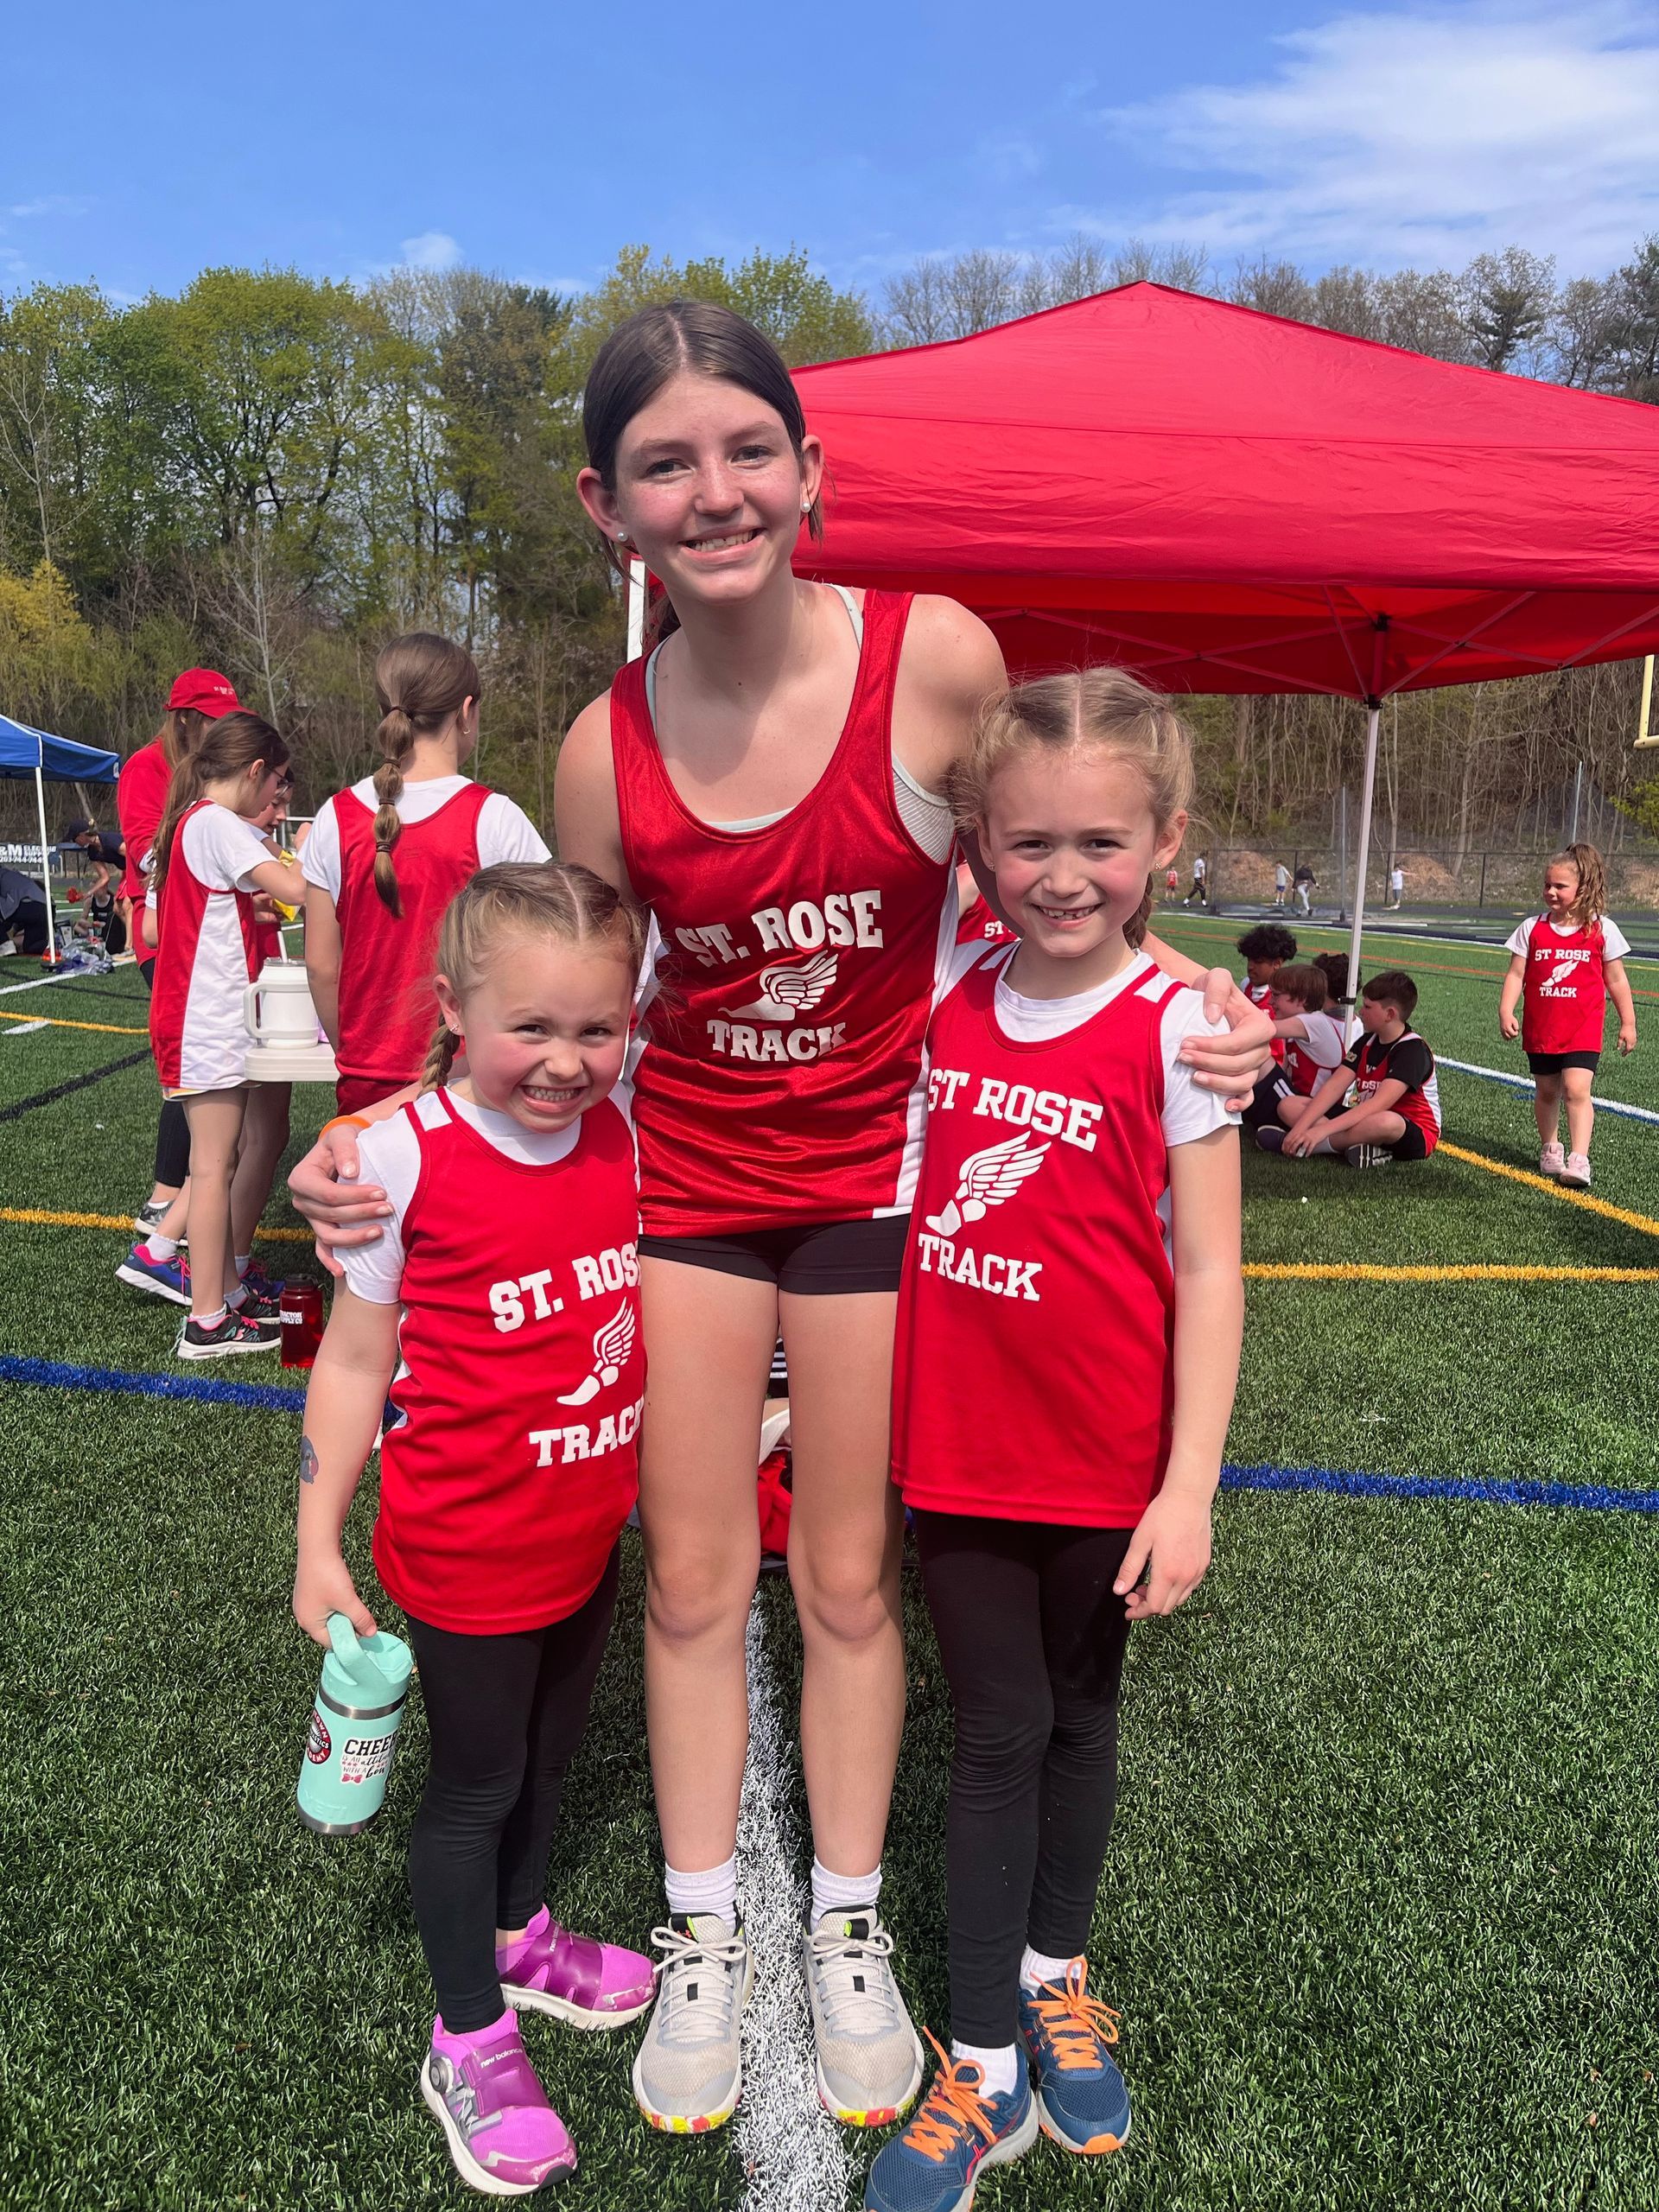 Three female students of varying ages wearing Track uniforms smile for the camera 